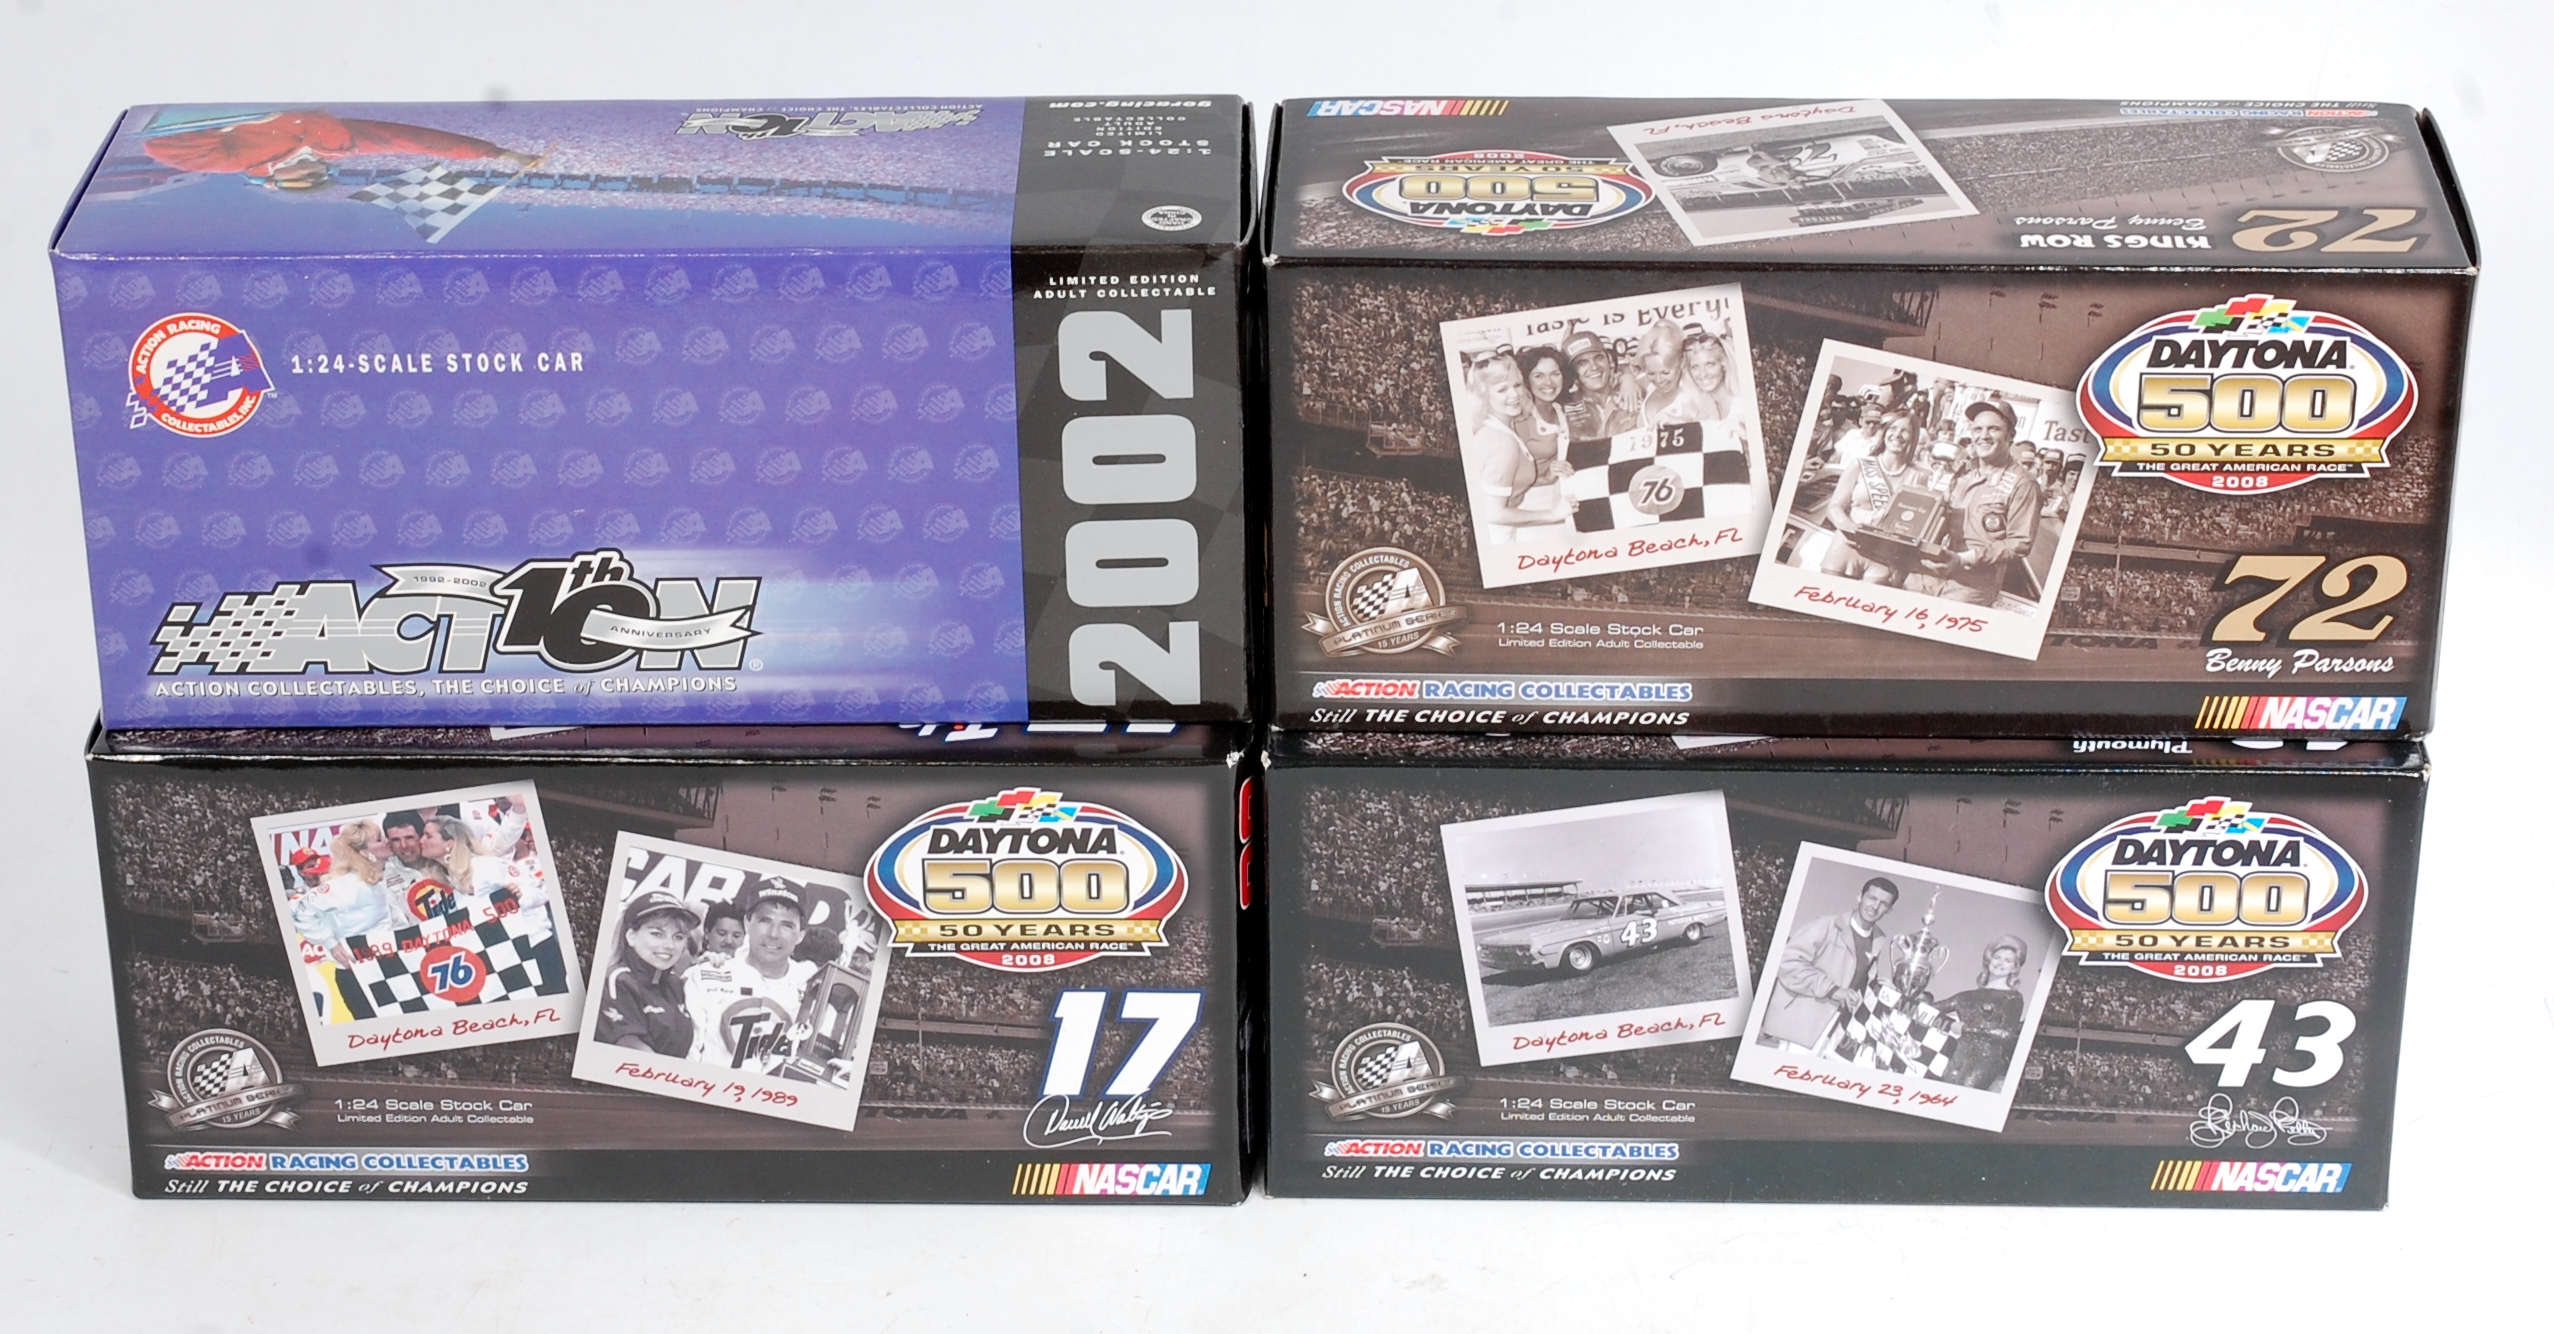 Action Racing Collectables 1/24th scale Daytona and Monte Carlo Race Car Group,